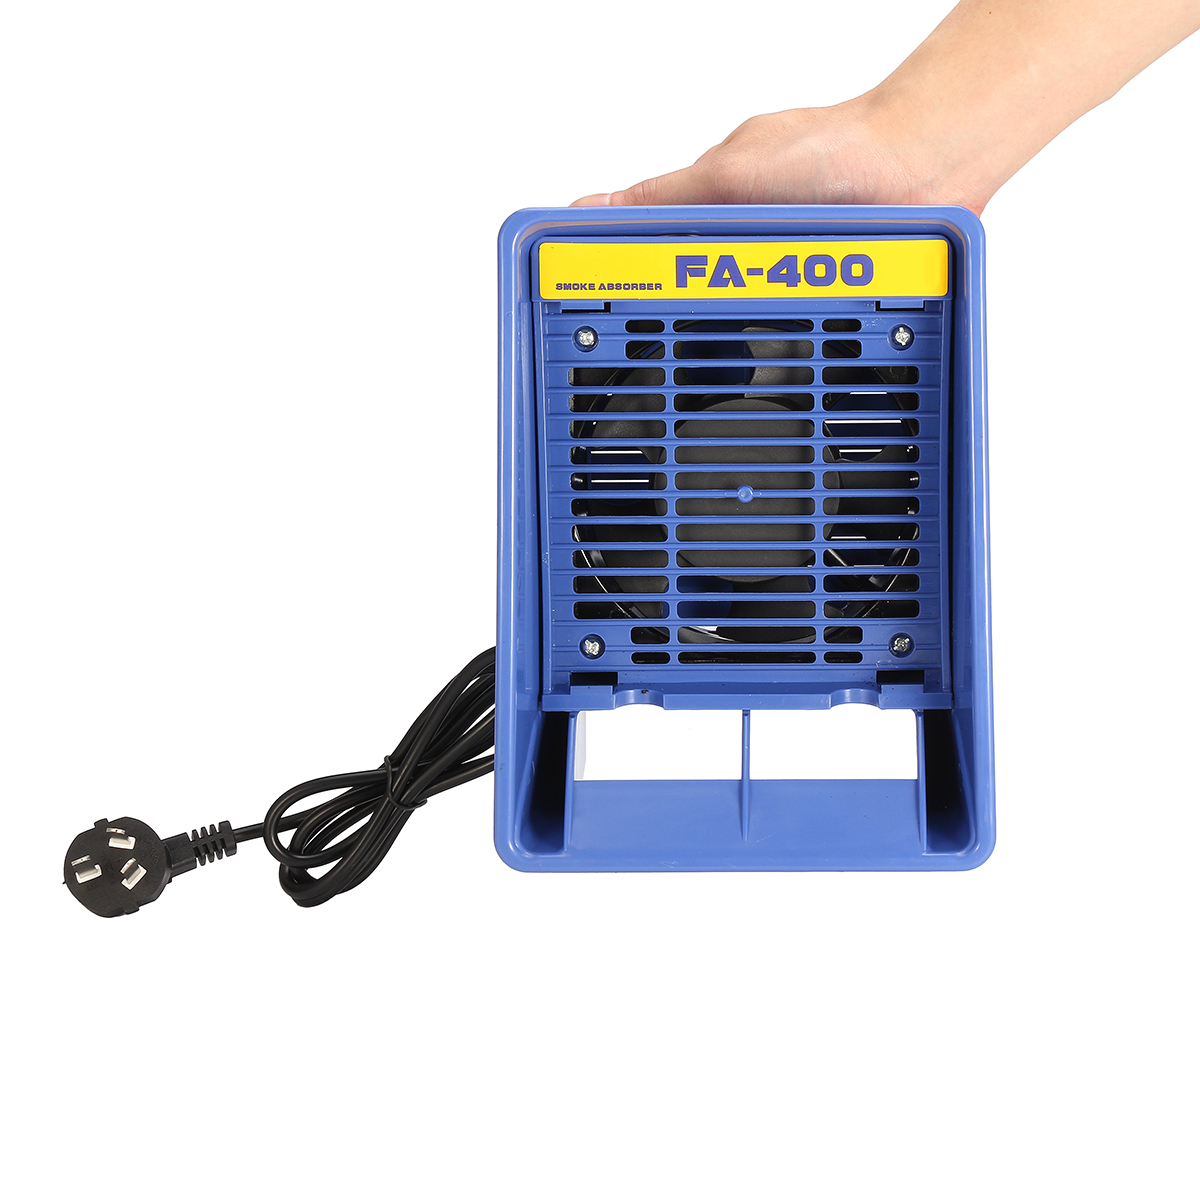 FA-400-110V-Soldering-Iron-Smoke-Absorber-Remover-Fume-Extractor-Smoke-Air-Fan--2-Filters-1335903-5